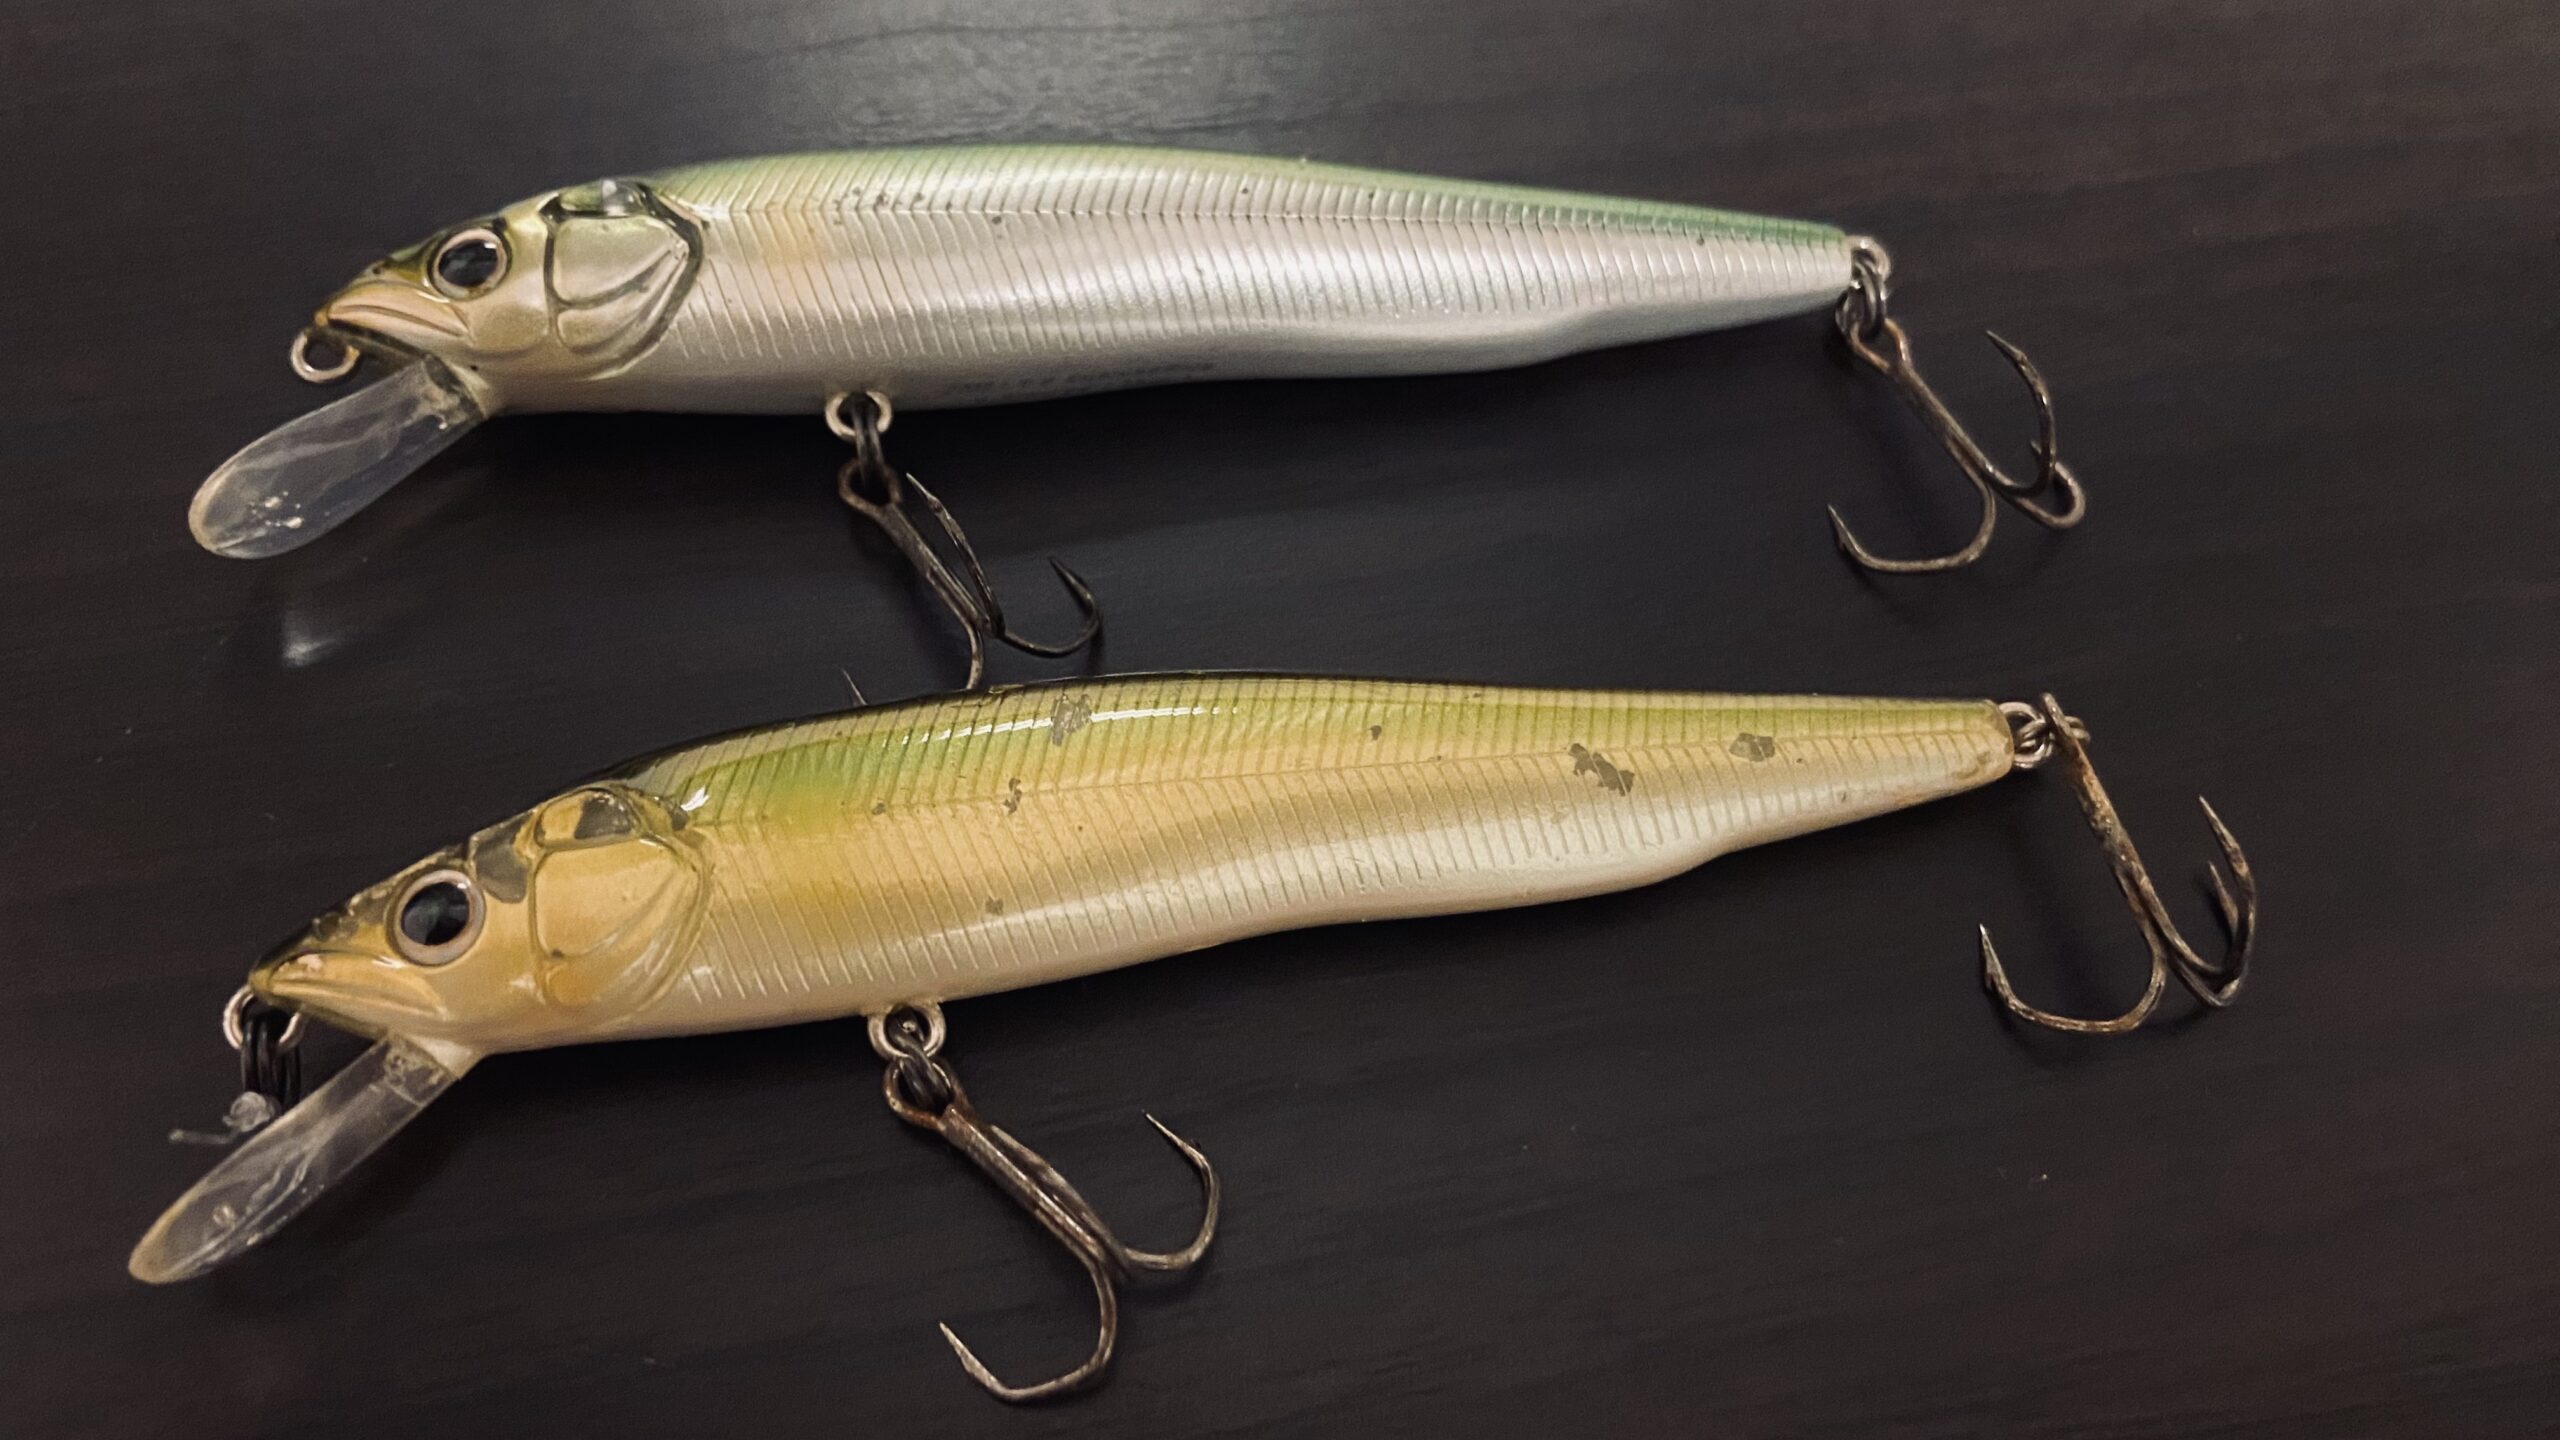 Megabass 5 lot of Lures FREE SHIPPING! Griffon Bait-X Ito Vision